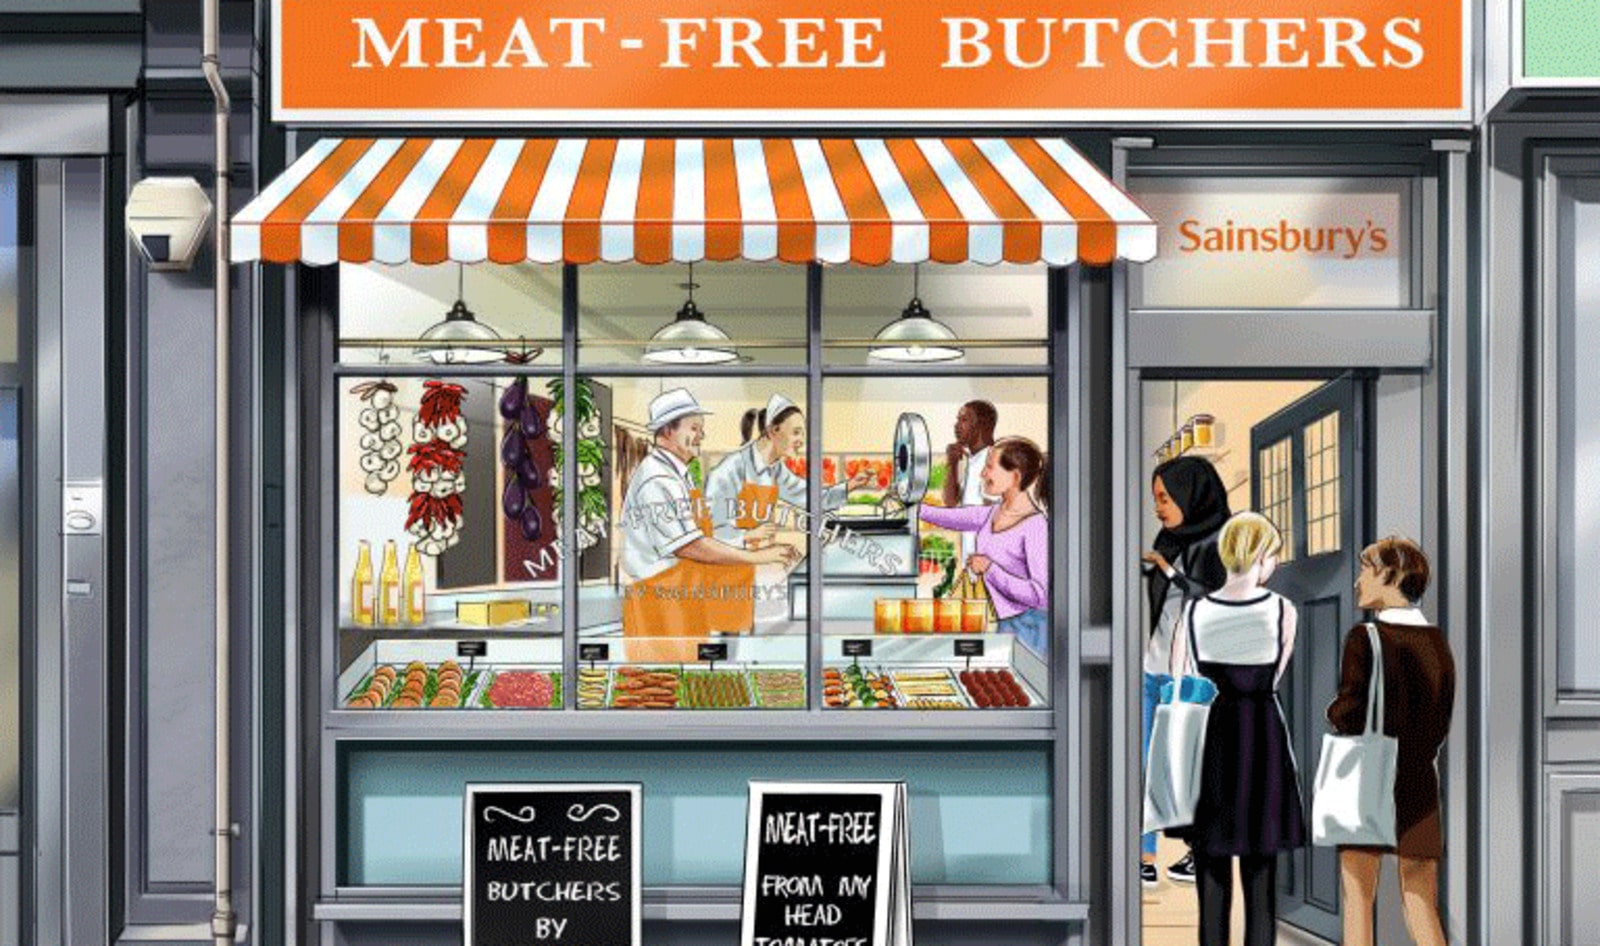 UK Supermarket Sainsbury’s Opens the Country’s First Vegan Butcher Shop